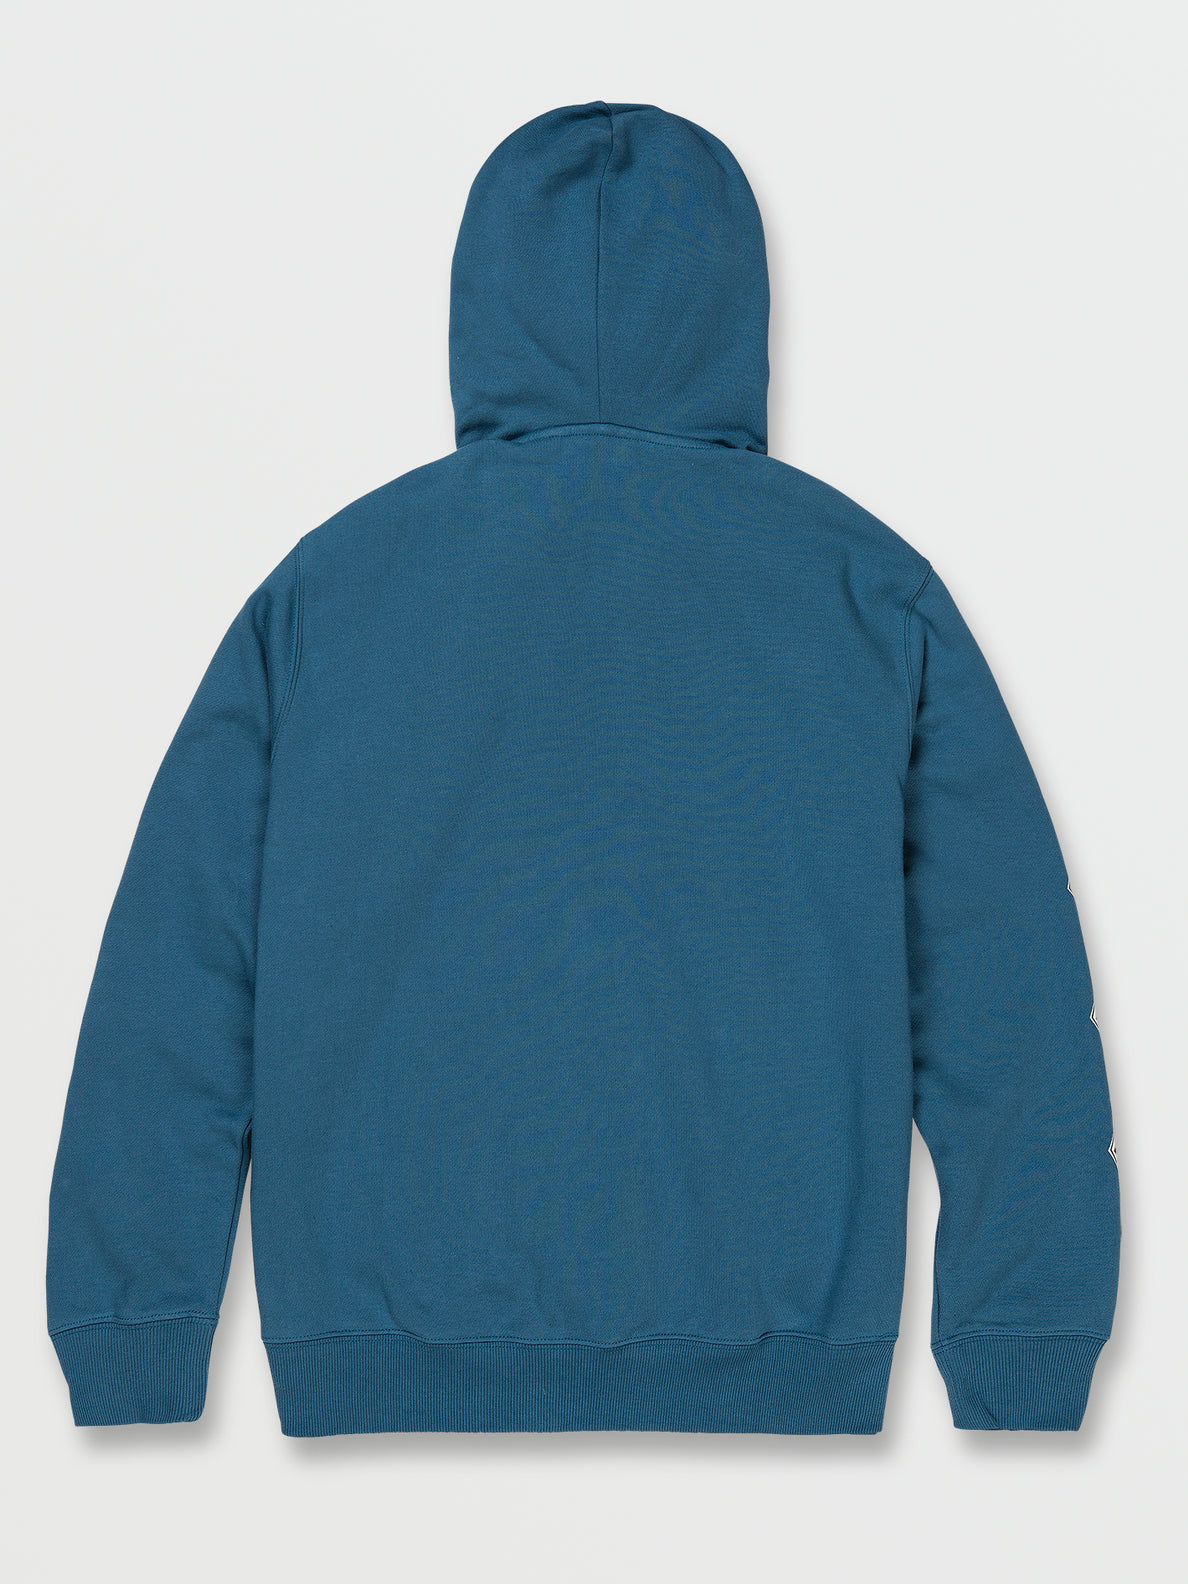 Iconic Stone Pullover Hoodie - Aged Indigo (A4112314_AIN) [B]